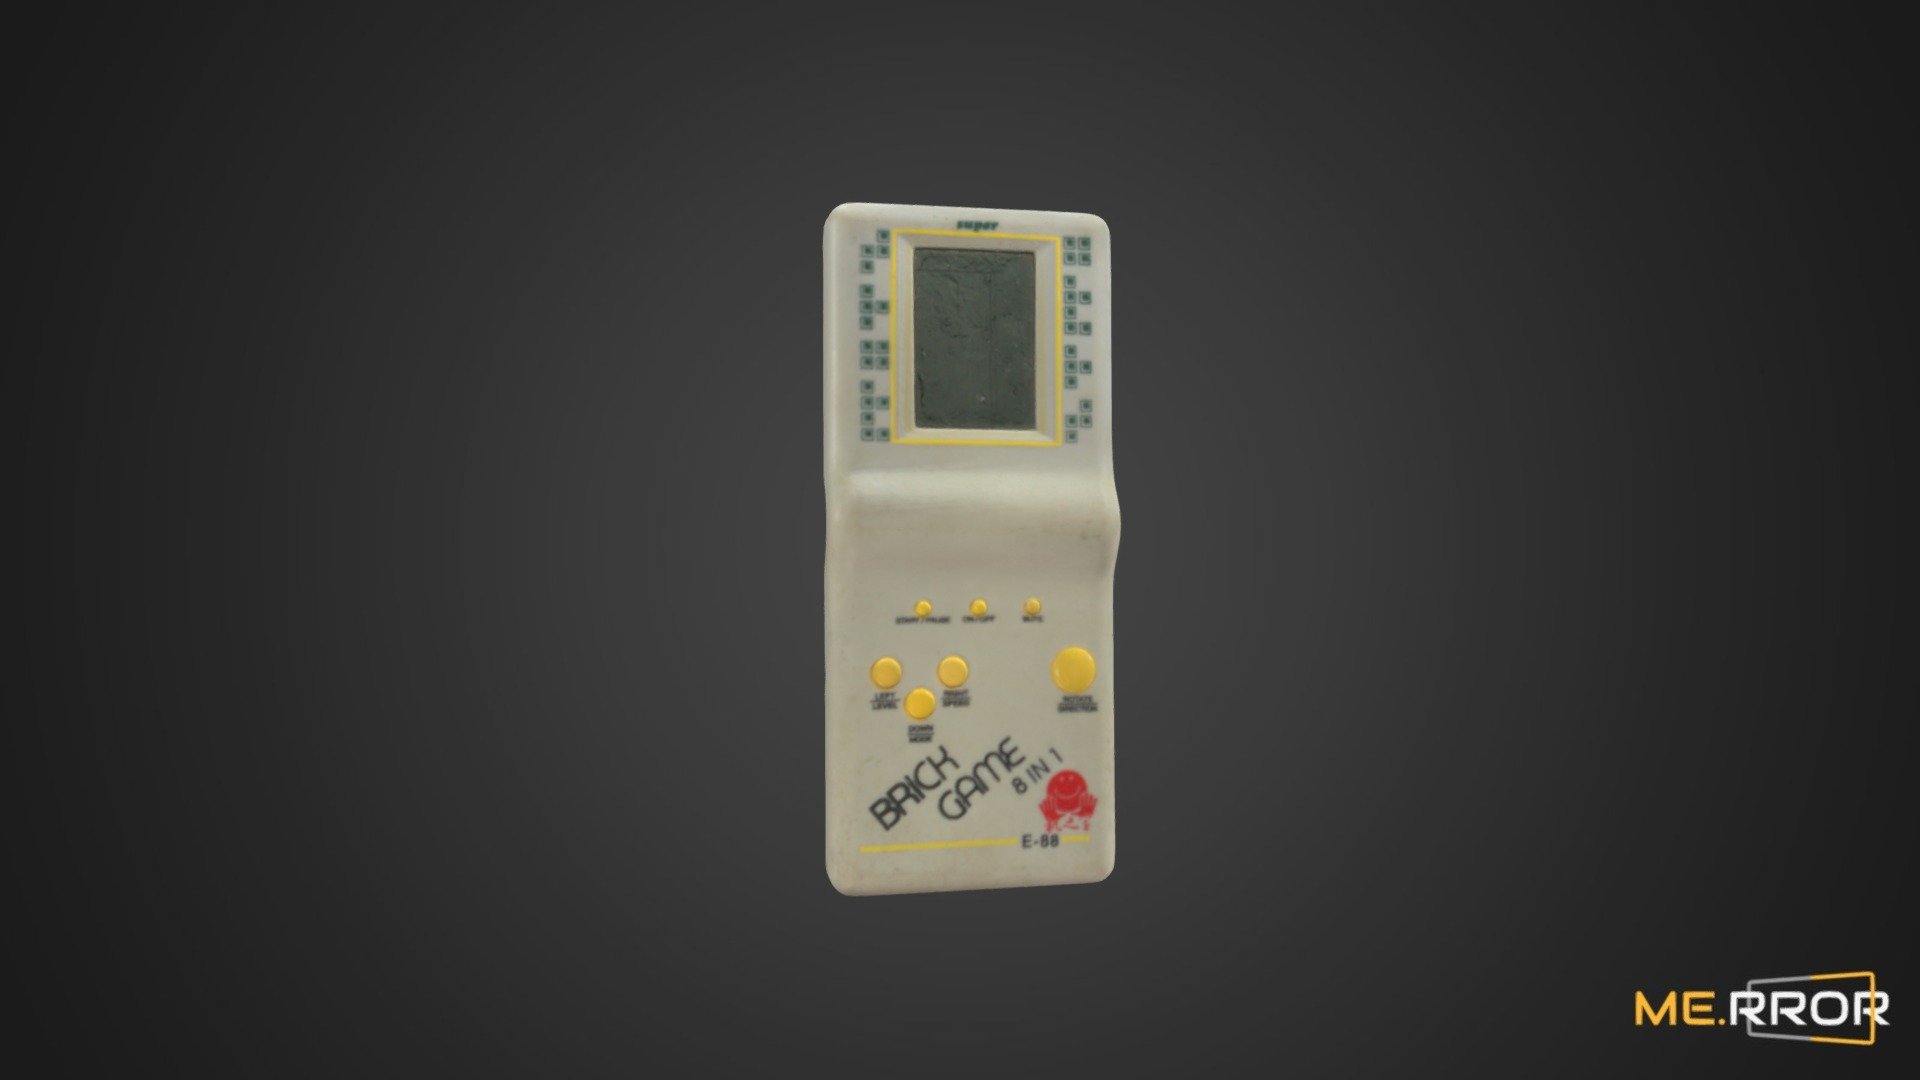 MERROR is a 3D Content PLATFORM which introduces various Asian assets to the 3D world


3DScanning #Photogrametry #ME.RROR - Game Boy - Buy Royalty Free 3D model by ME.RROR (@merror) 3d model